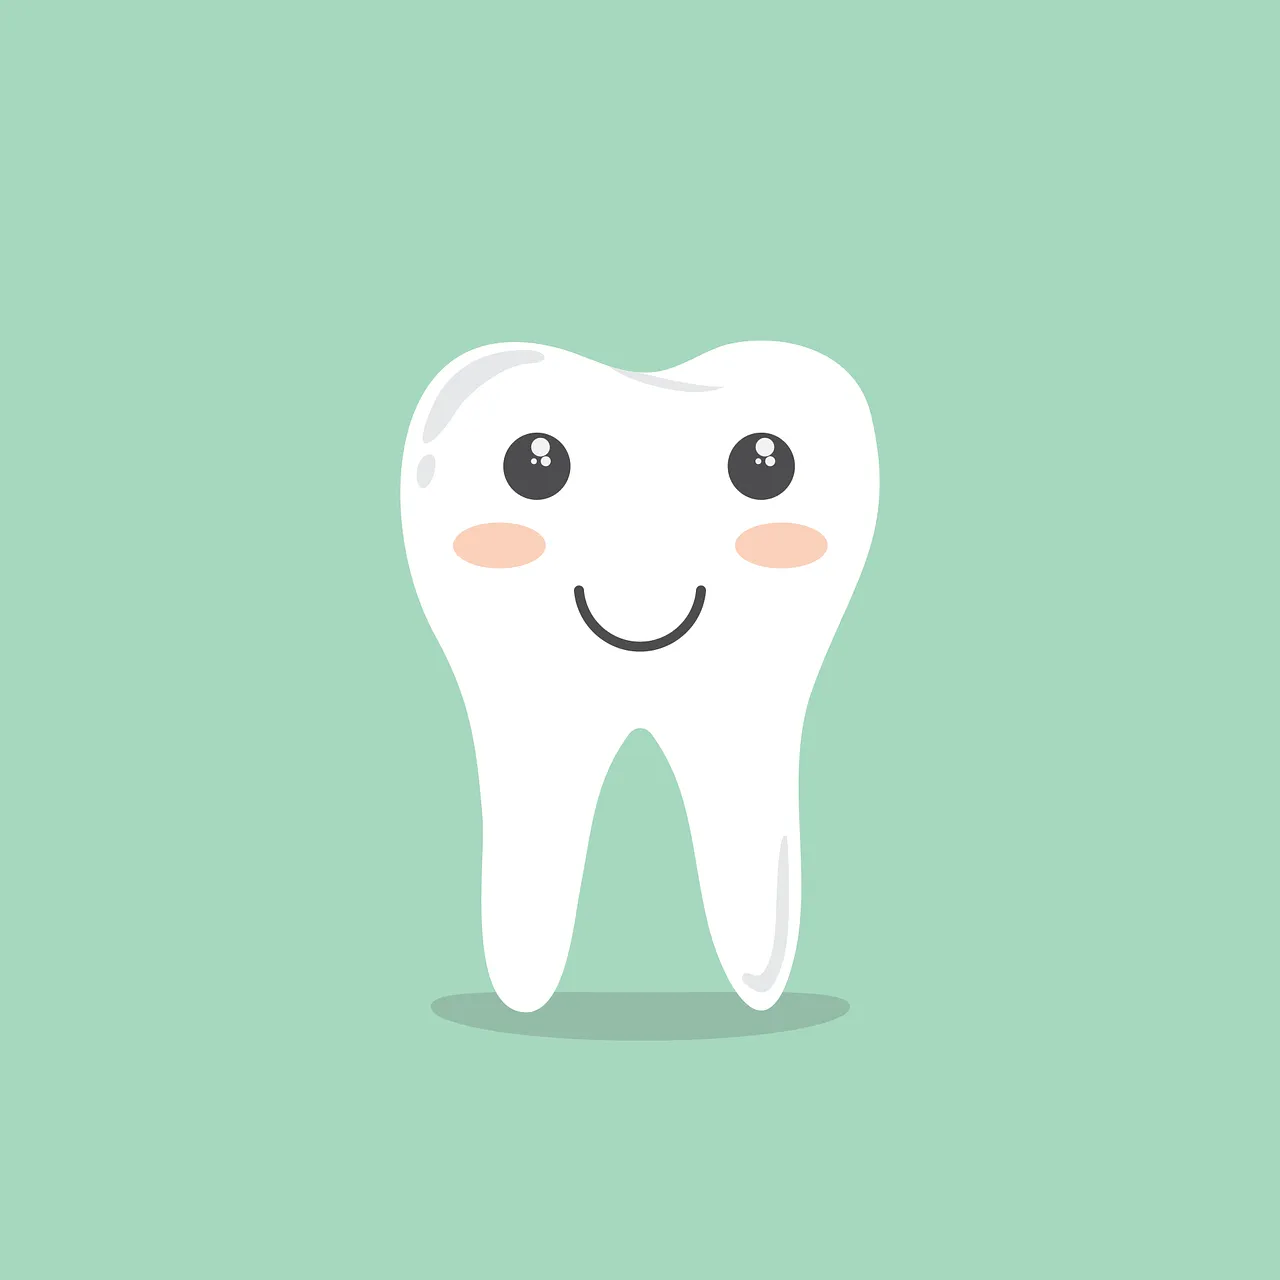 Cartoon image of a tooth smiling